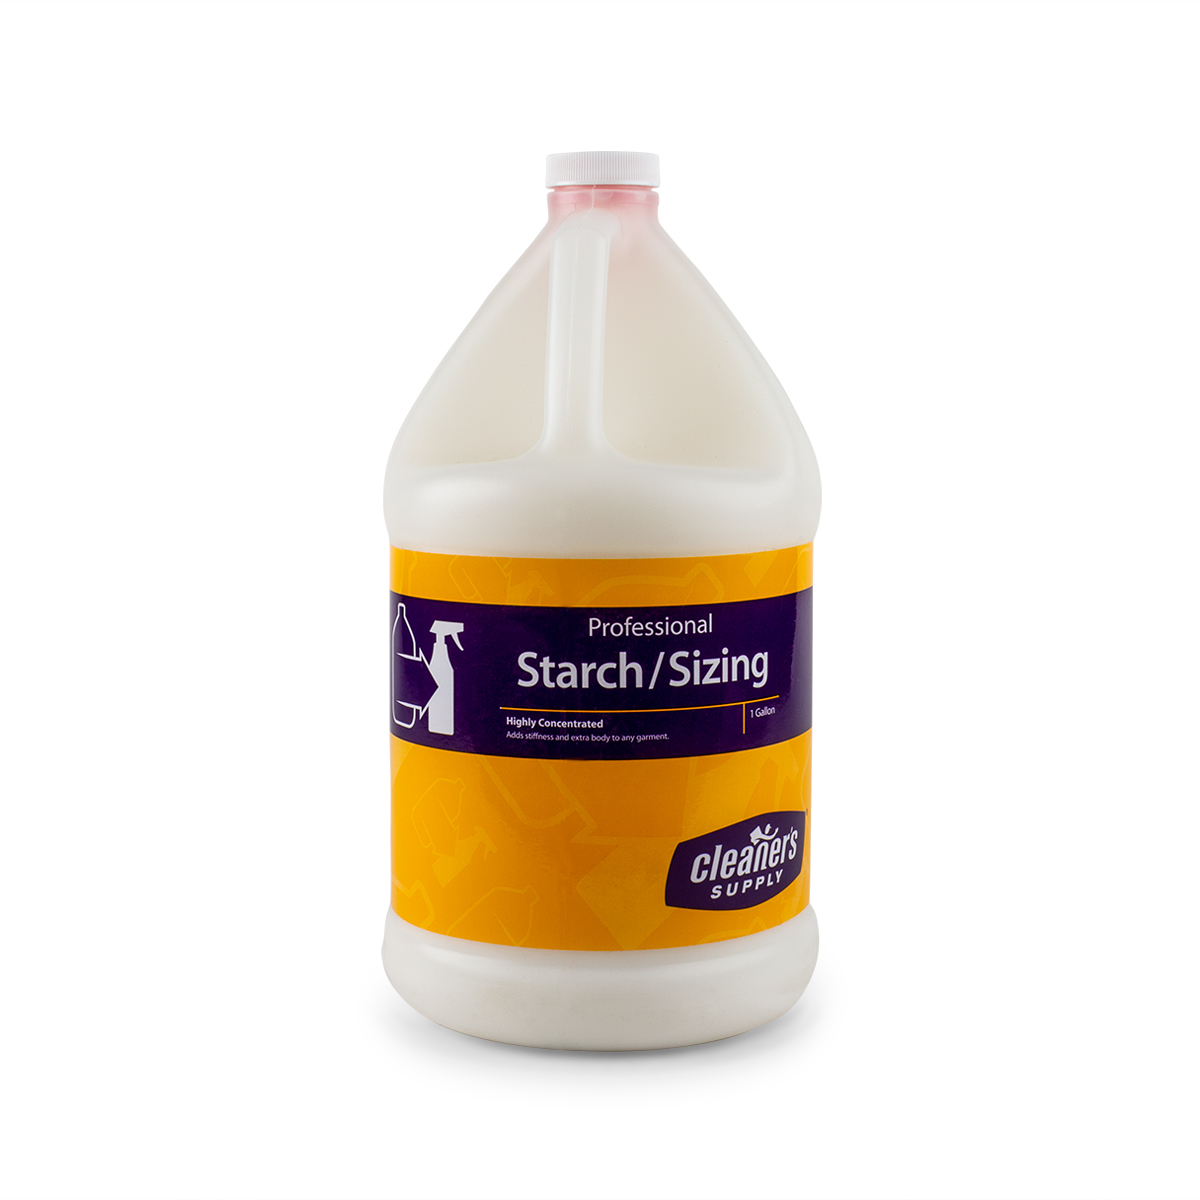 Wholesale 300ml clothes spray starch for Household Cleaning and Pest  Control 